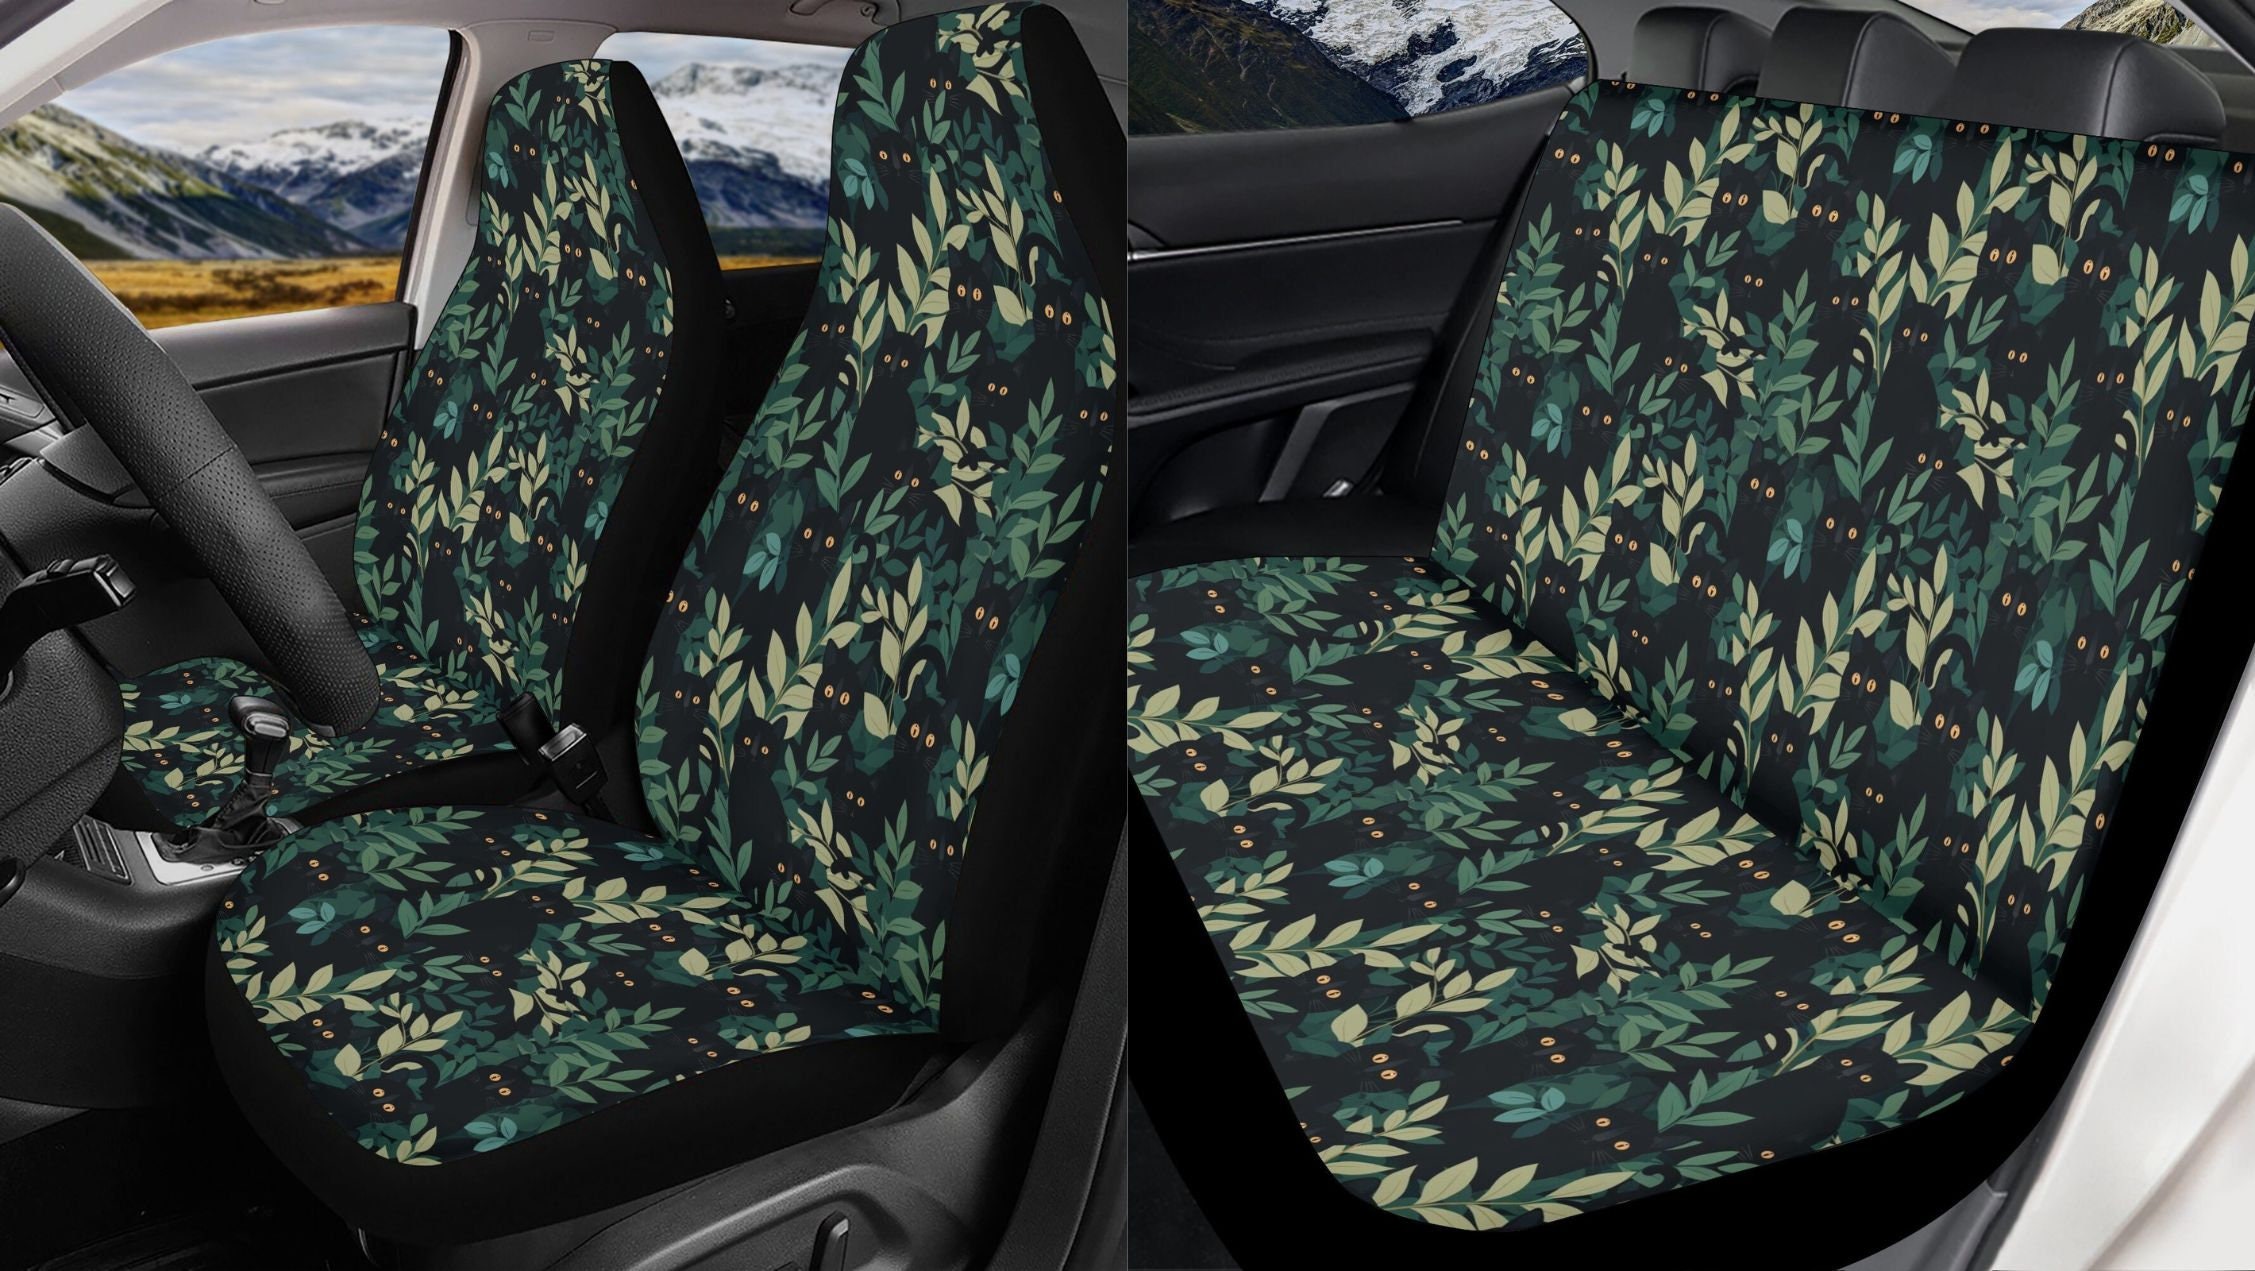 Witchy Cat Forest Car Seat Cover Full Set, Steering Wheel Cover, Car Decor Gift